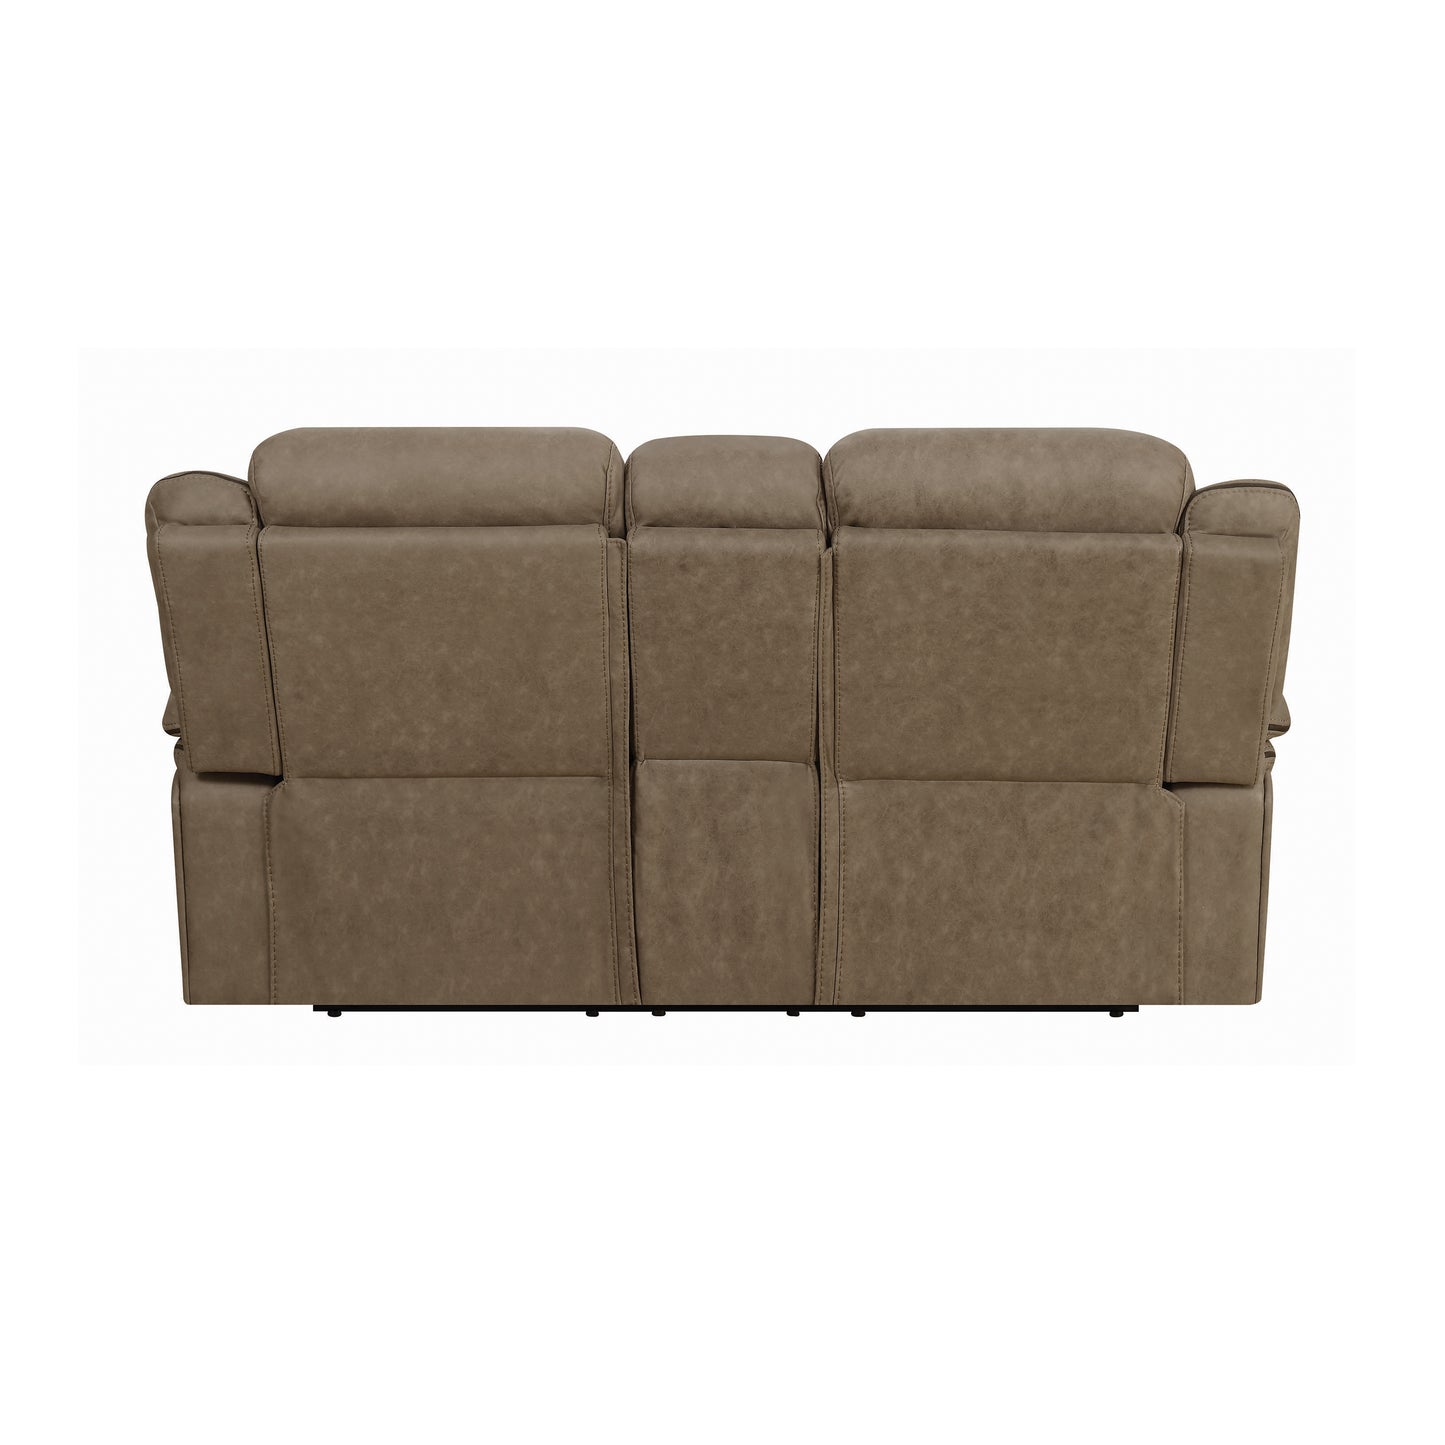 Higgins Pillow Top Arm Motion Loveseat with Console Tan